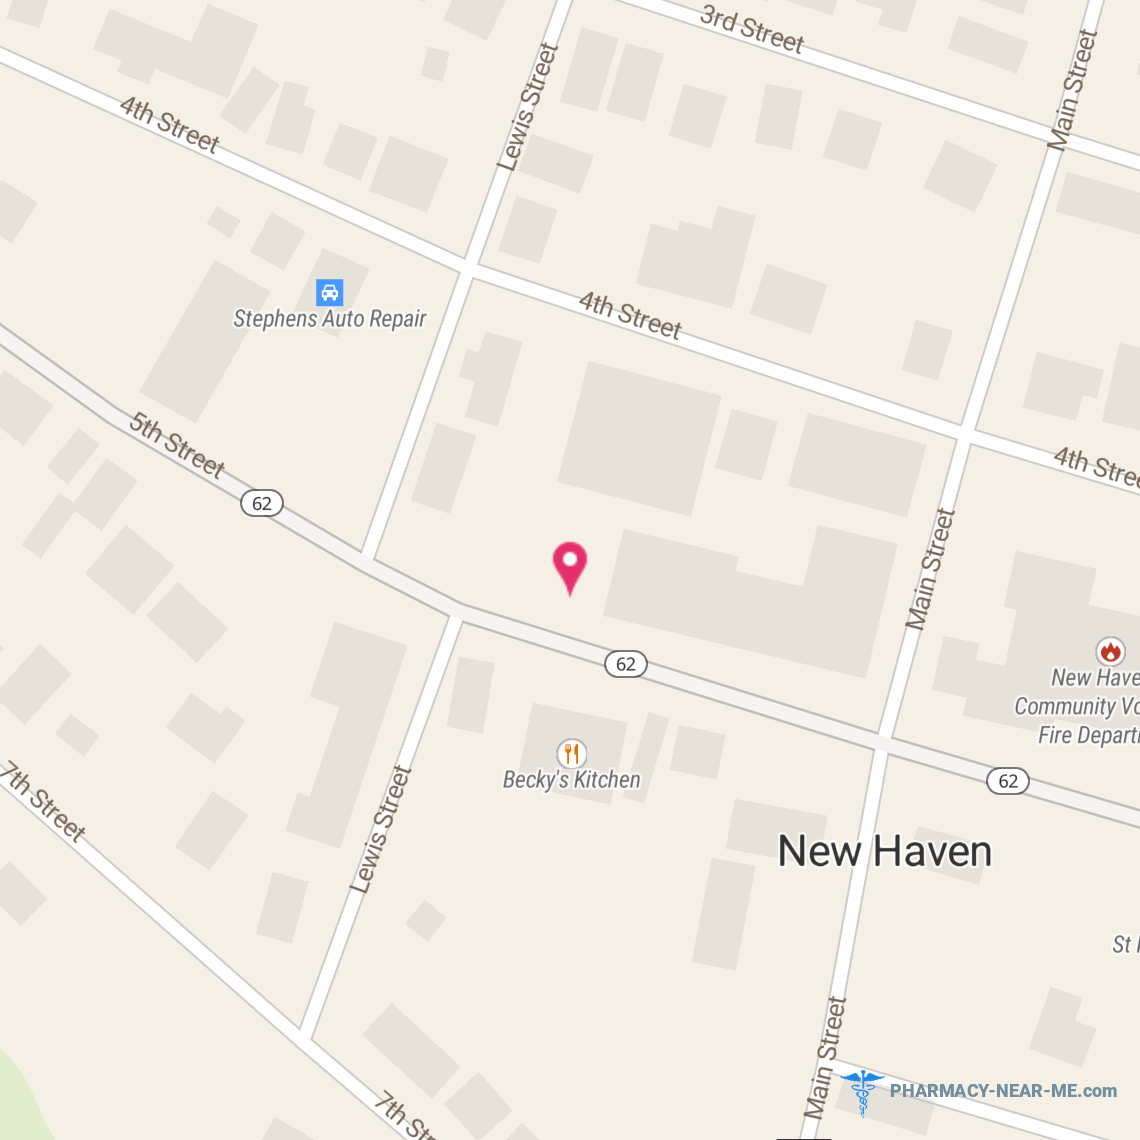 NEW HAVEN PHARMACY - Pharmacy Hours, Phone, Reviews & Information: 307 5th Street, New Haven, West Virginia 25265, United States